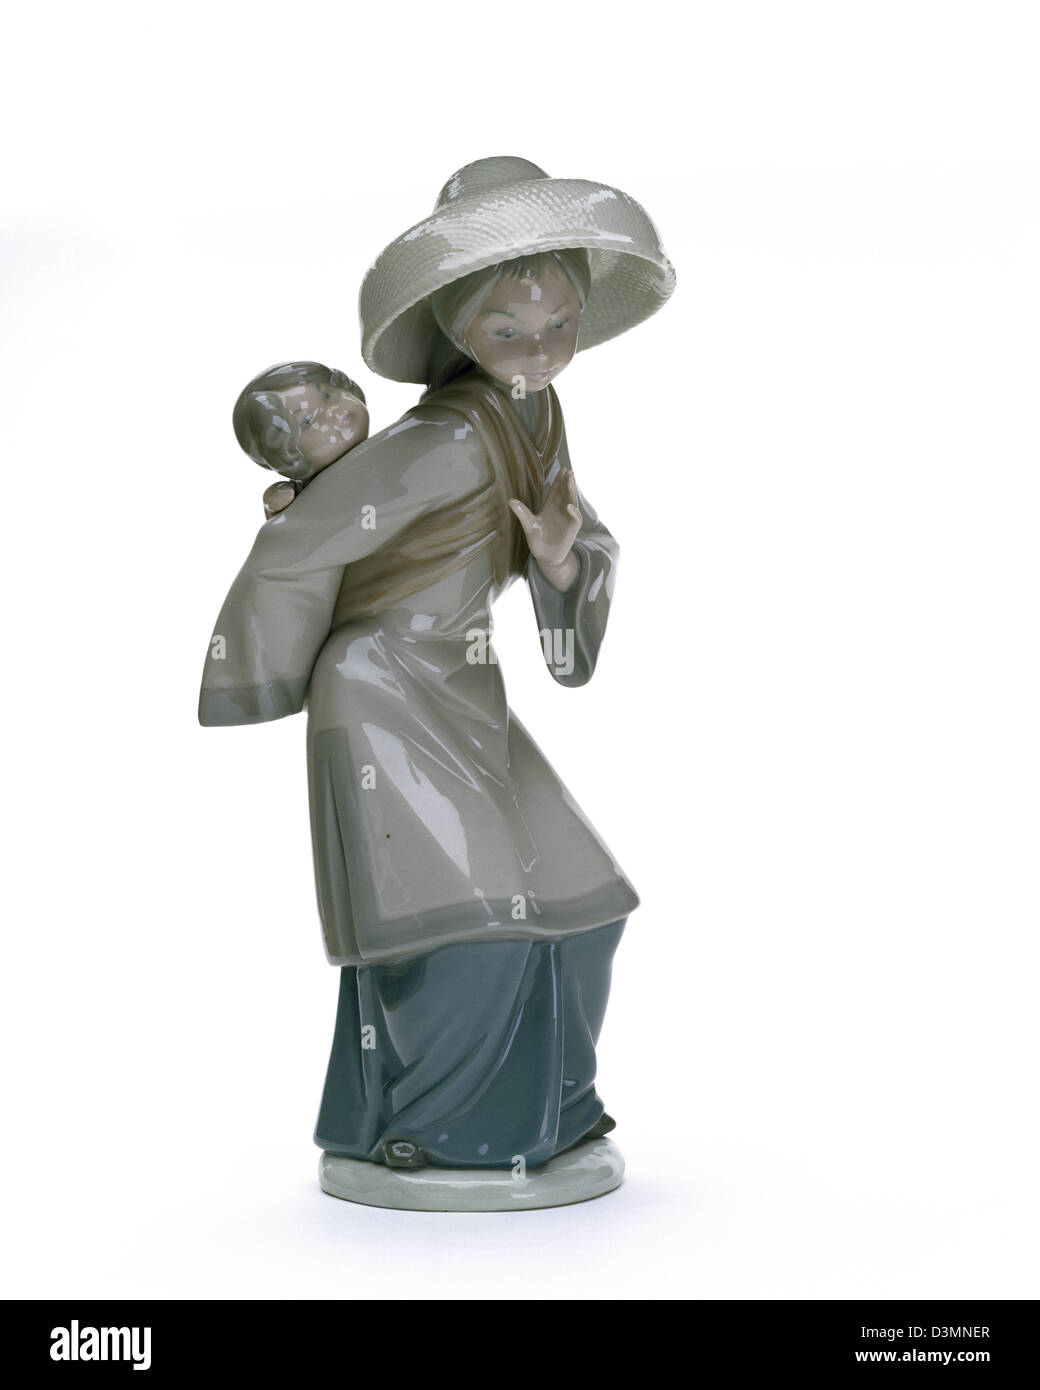 Lladro figure of Chinese mother and baby Stock Photo